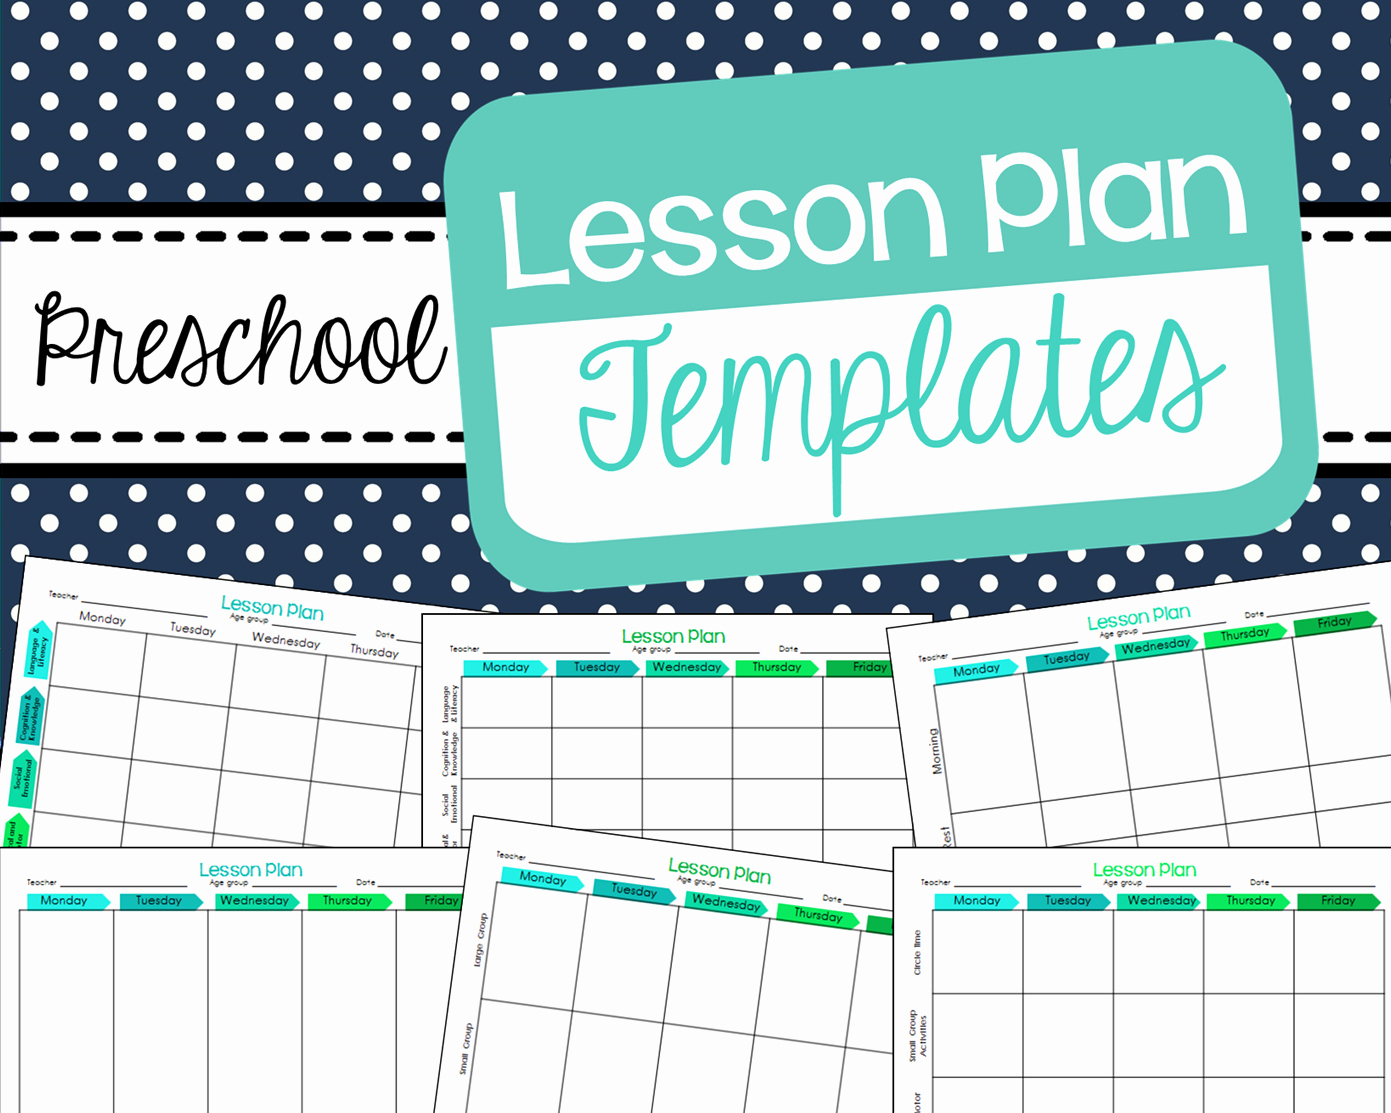 Free Preschool Lesson Plan Template Awesome Free Preschool Lesson Plan Templates